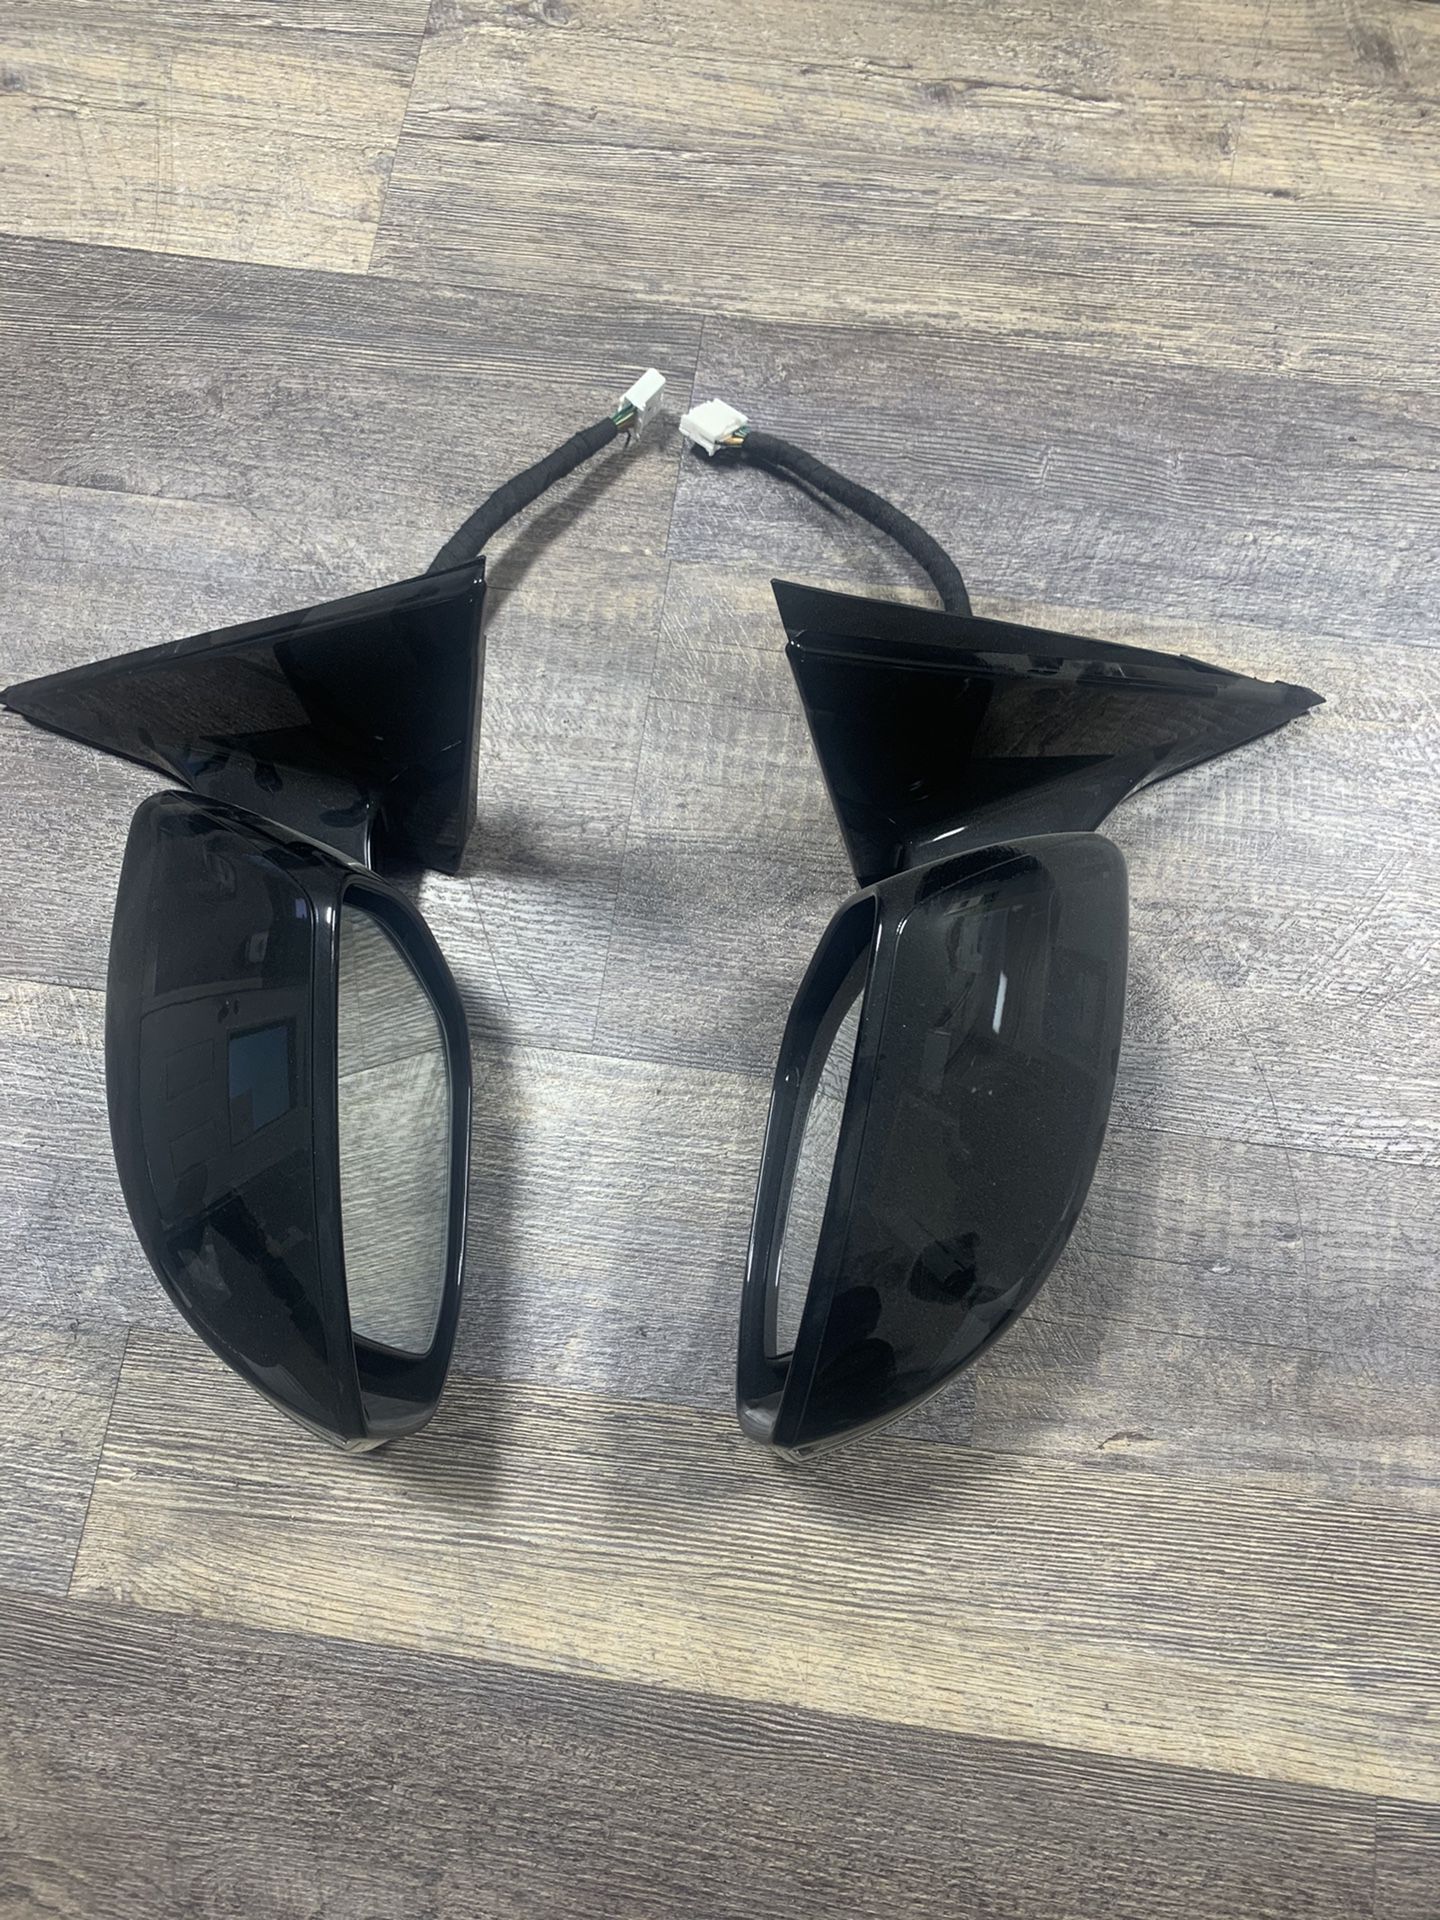 2016 to 2020 Nissan Maxima oem mirrors with camera $350 each serious inquires only please Maxima parts